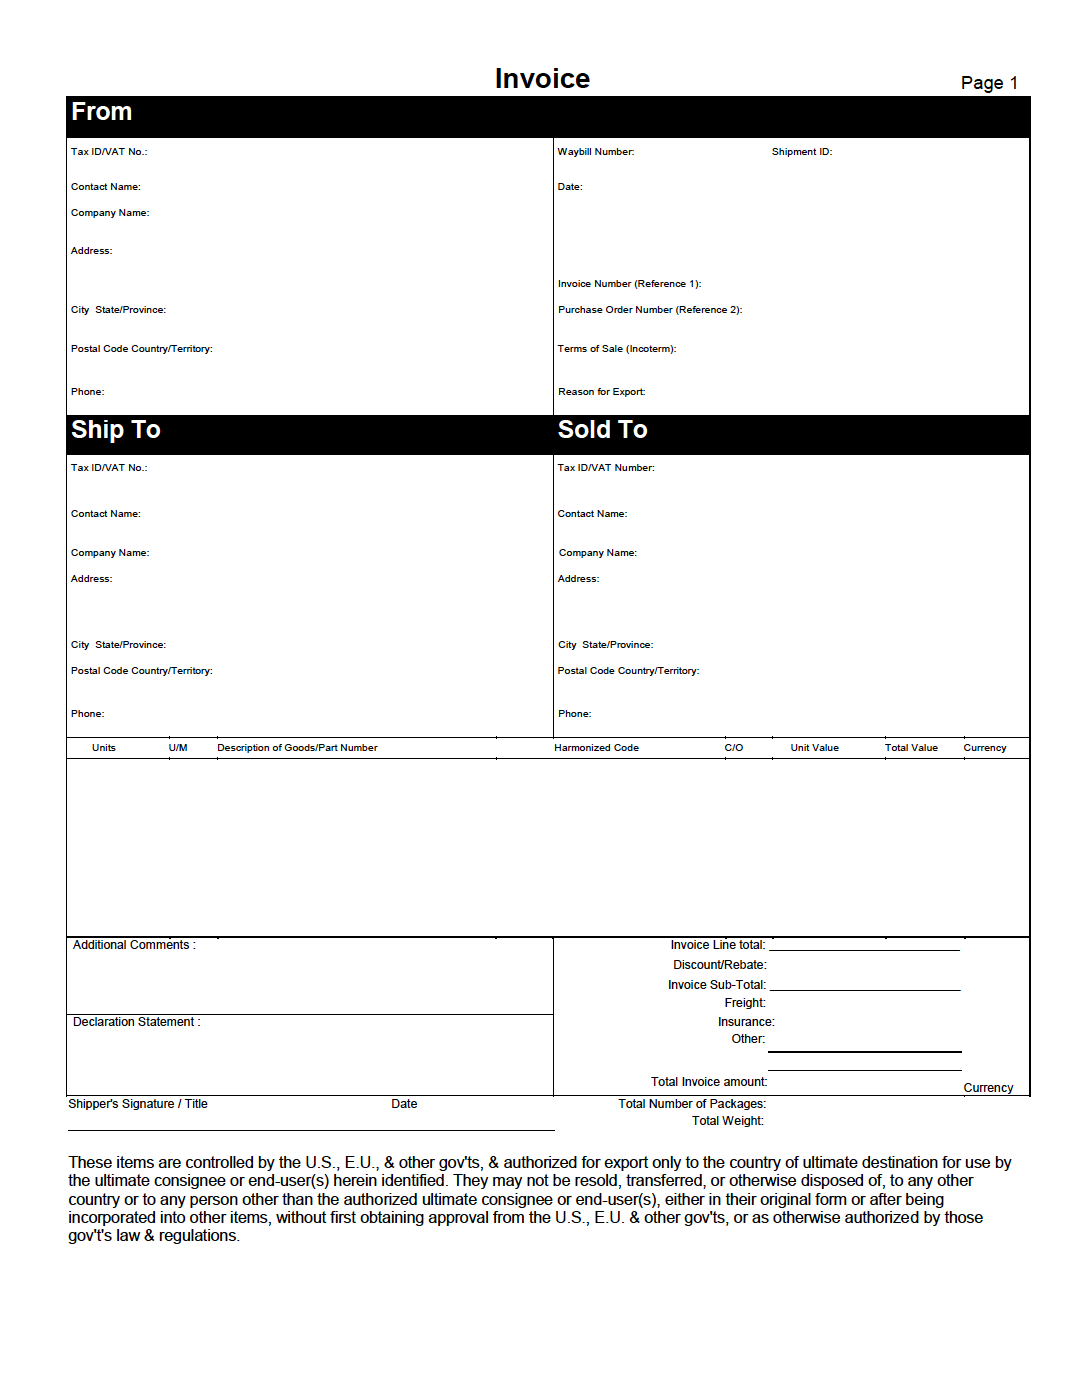 ups commercial invoice template word